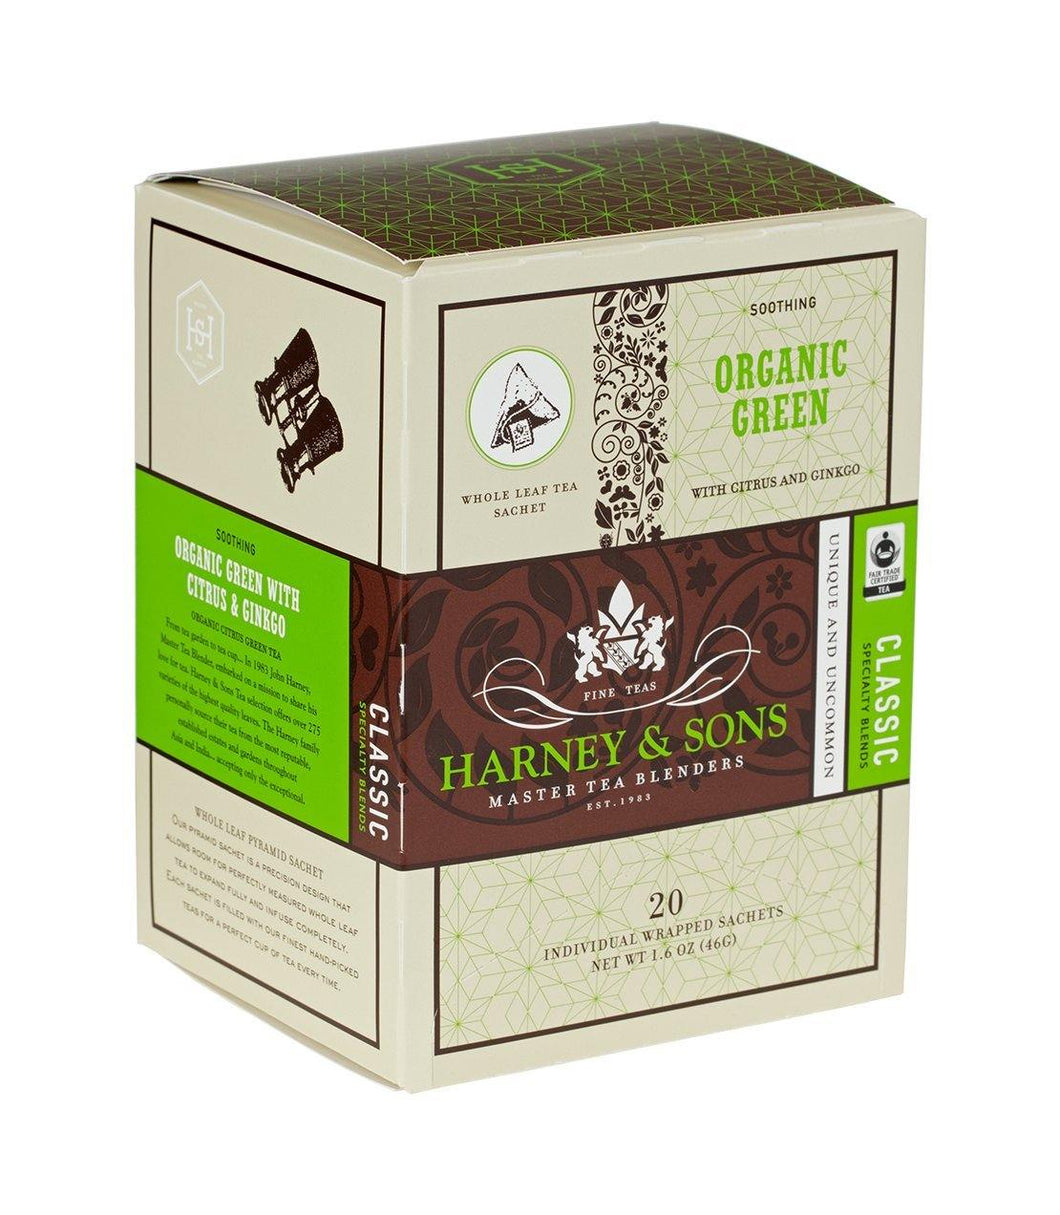 Harney & Sons Organic Green with Citrus & Ginkgo 20 Wrapped Sachets - Premium Teas Canada